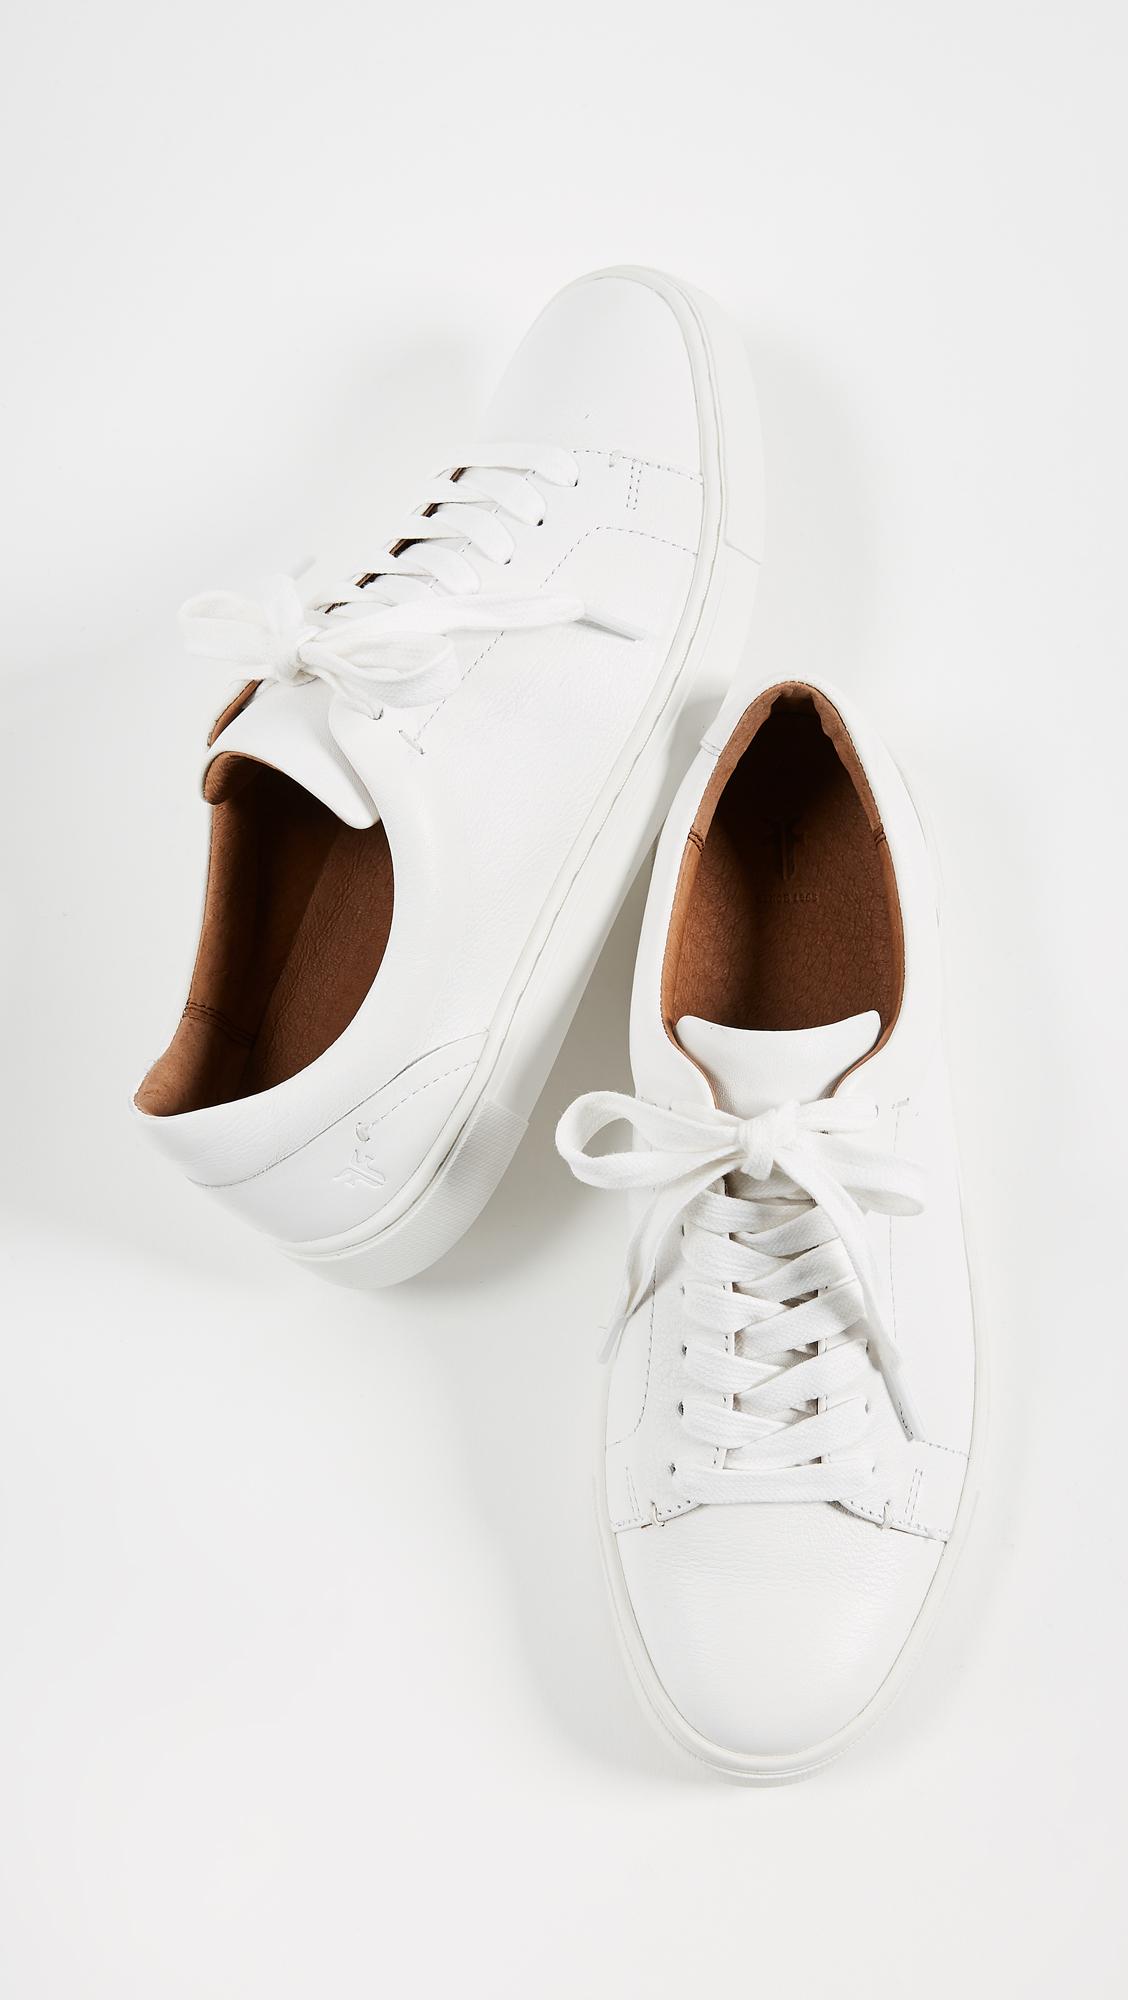 Frye Ivy Low Lace Sneakers in White - Lyst